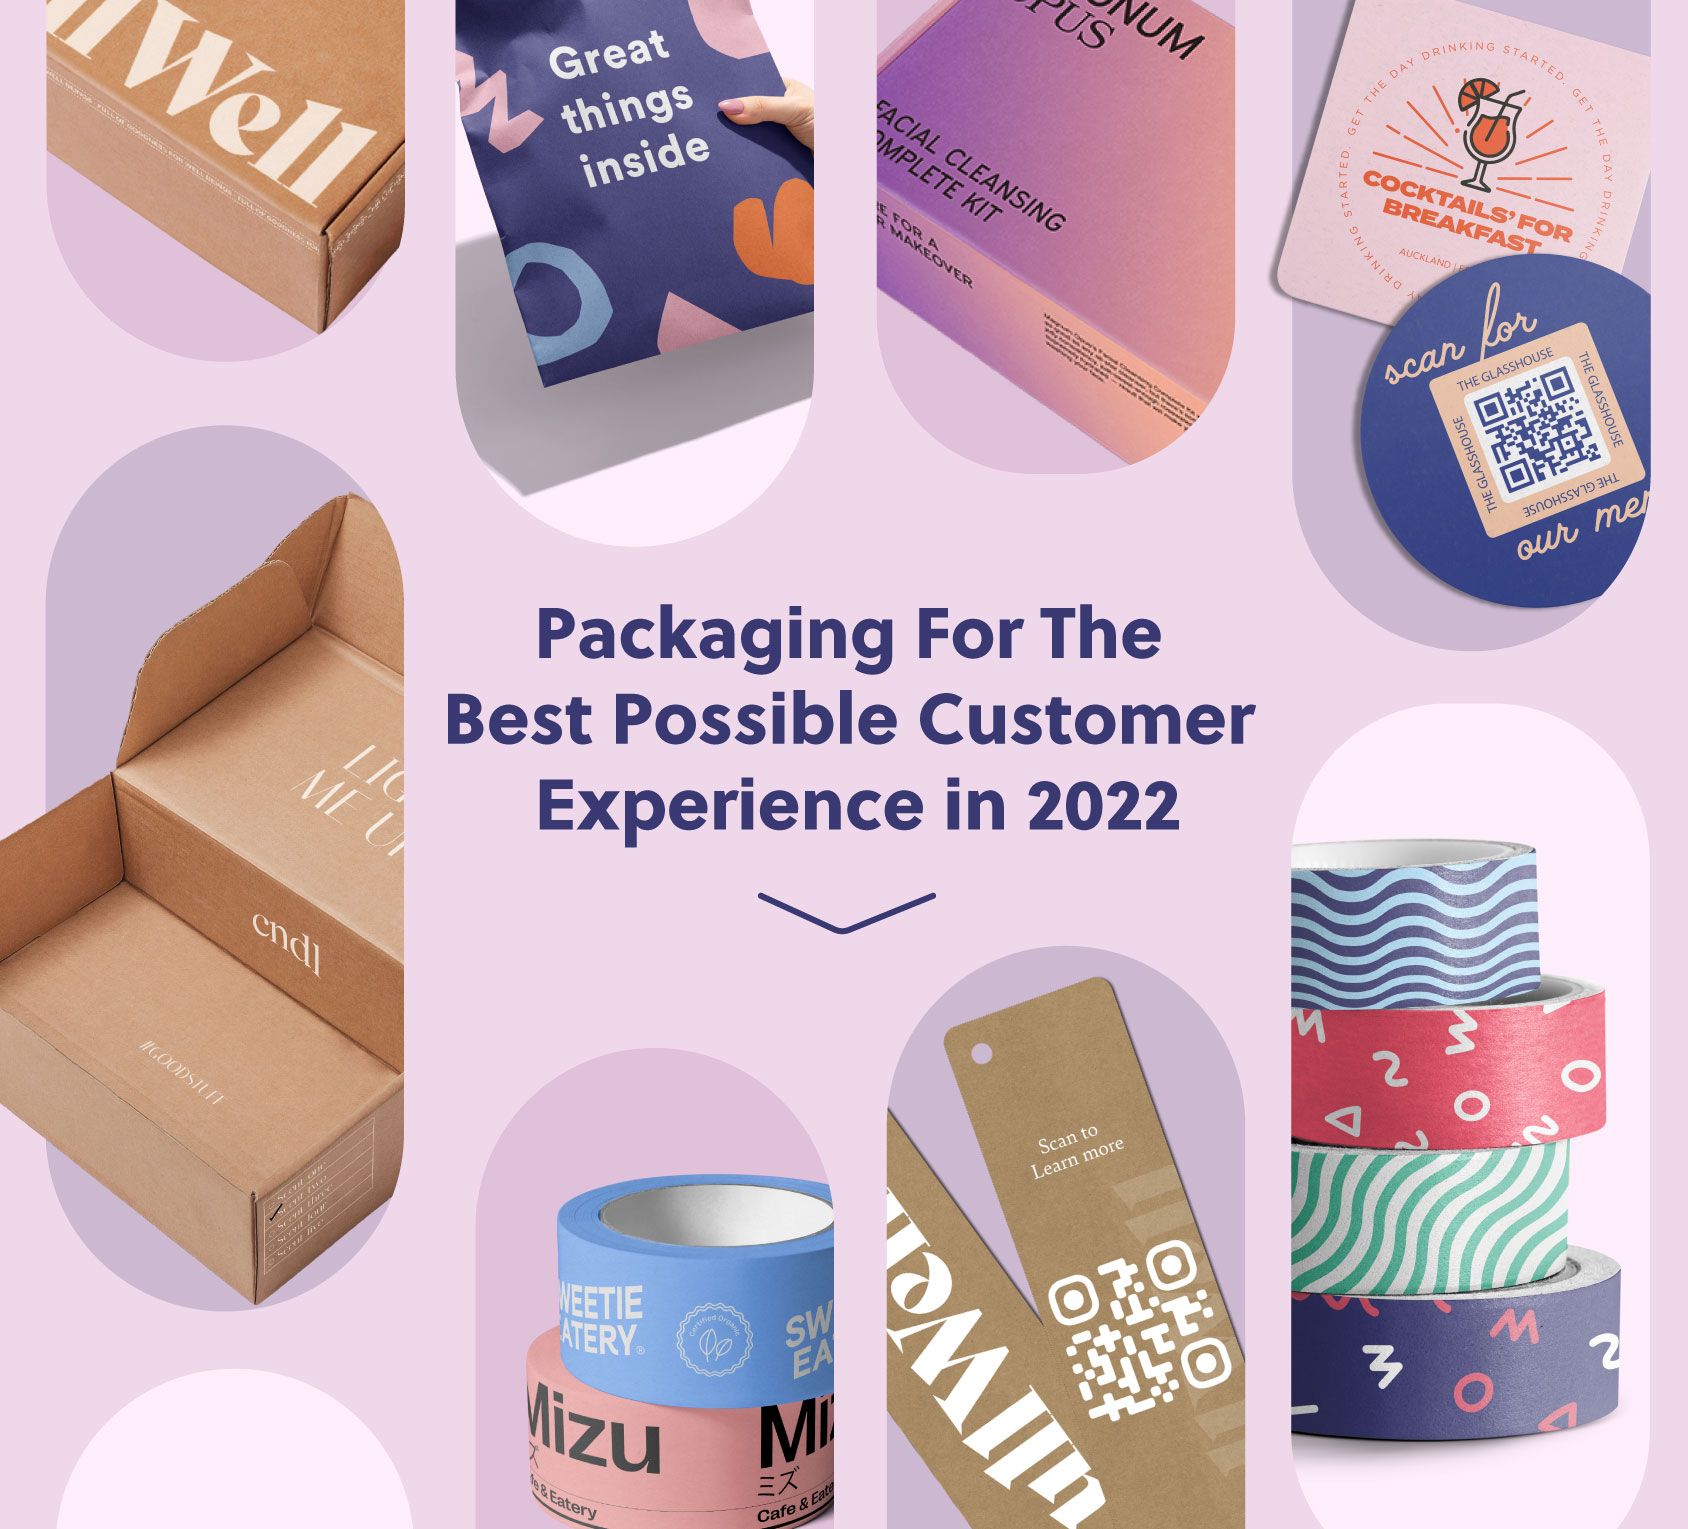 Packaging For The
Best Possible Customer
Experience in 2022 (Download Our Guide!)